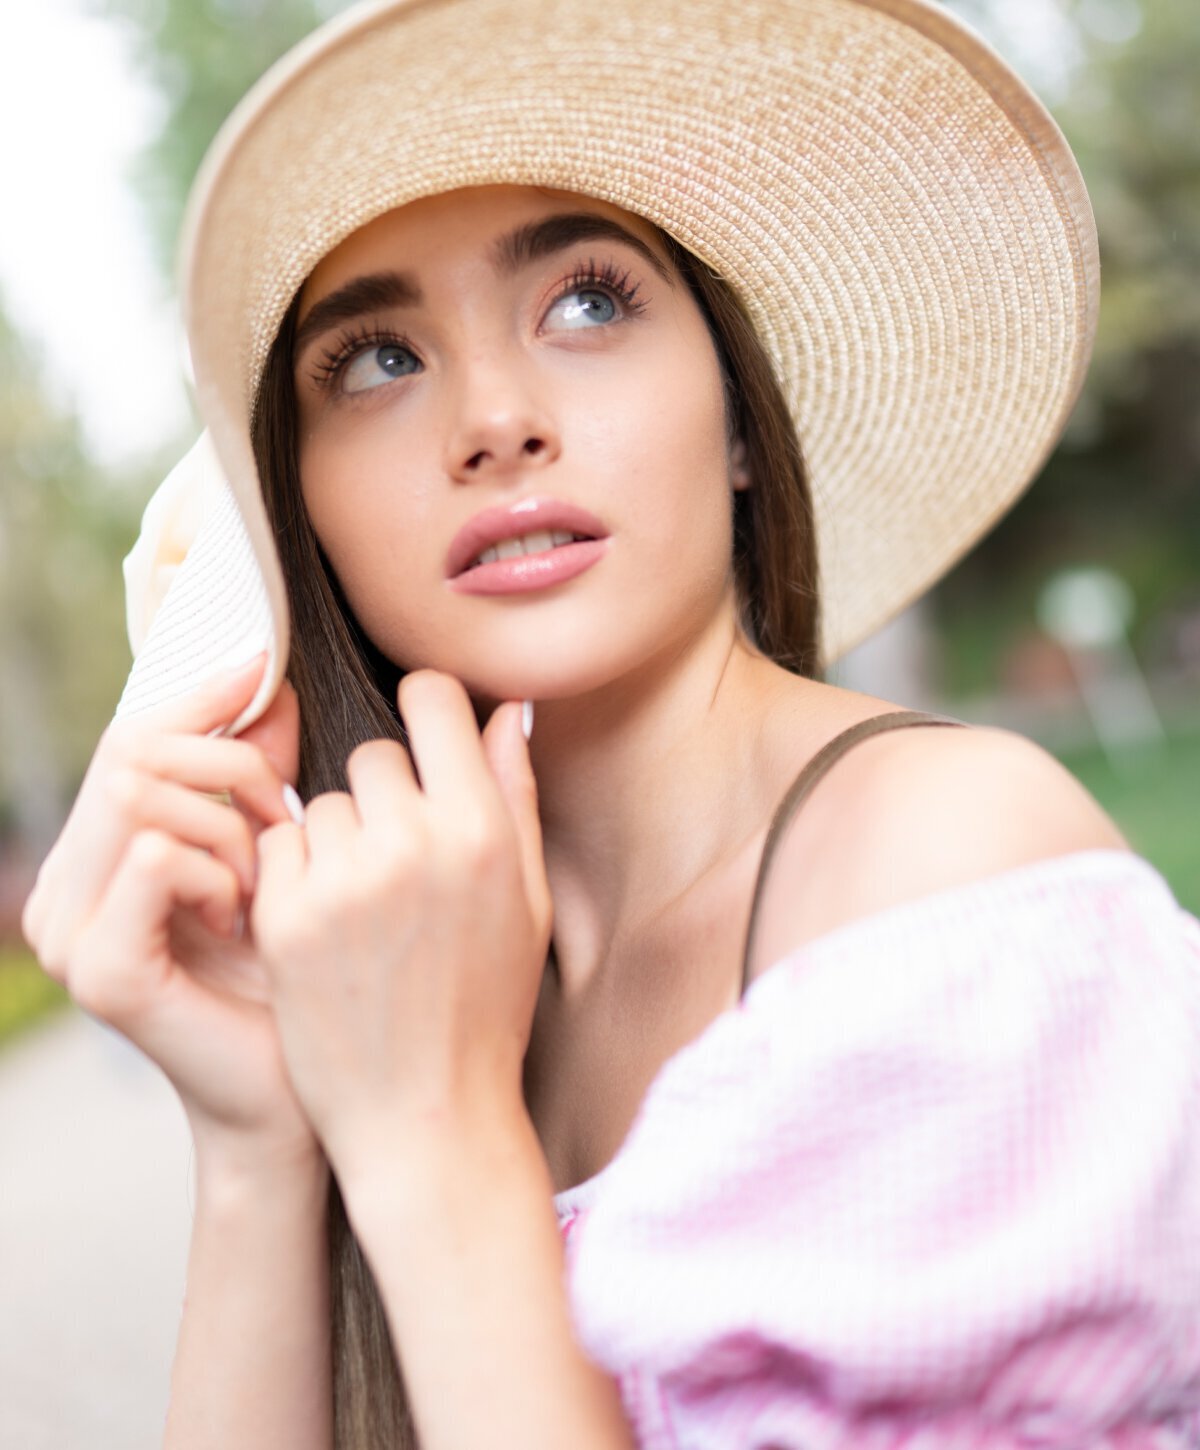 Miami juvederm model with a tan hat